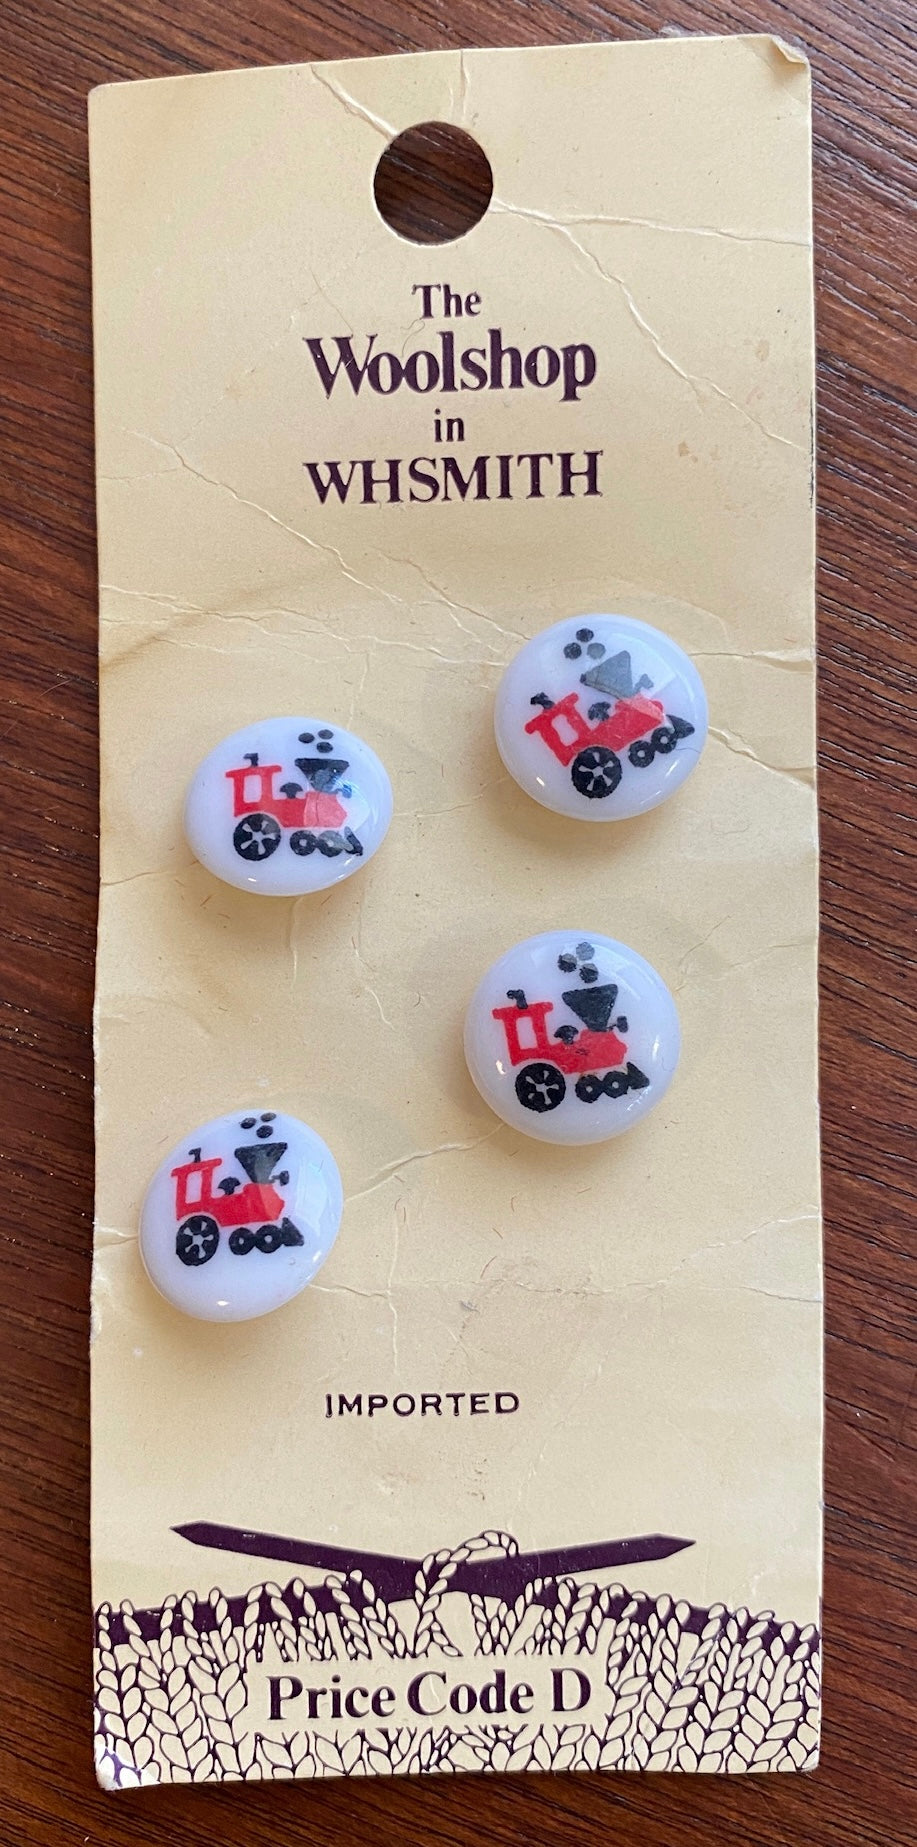 Vintage The Woolshop in WH Smith Railroad Train Buttons Set